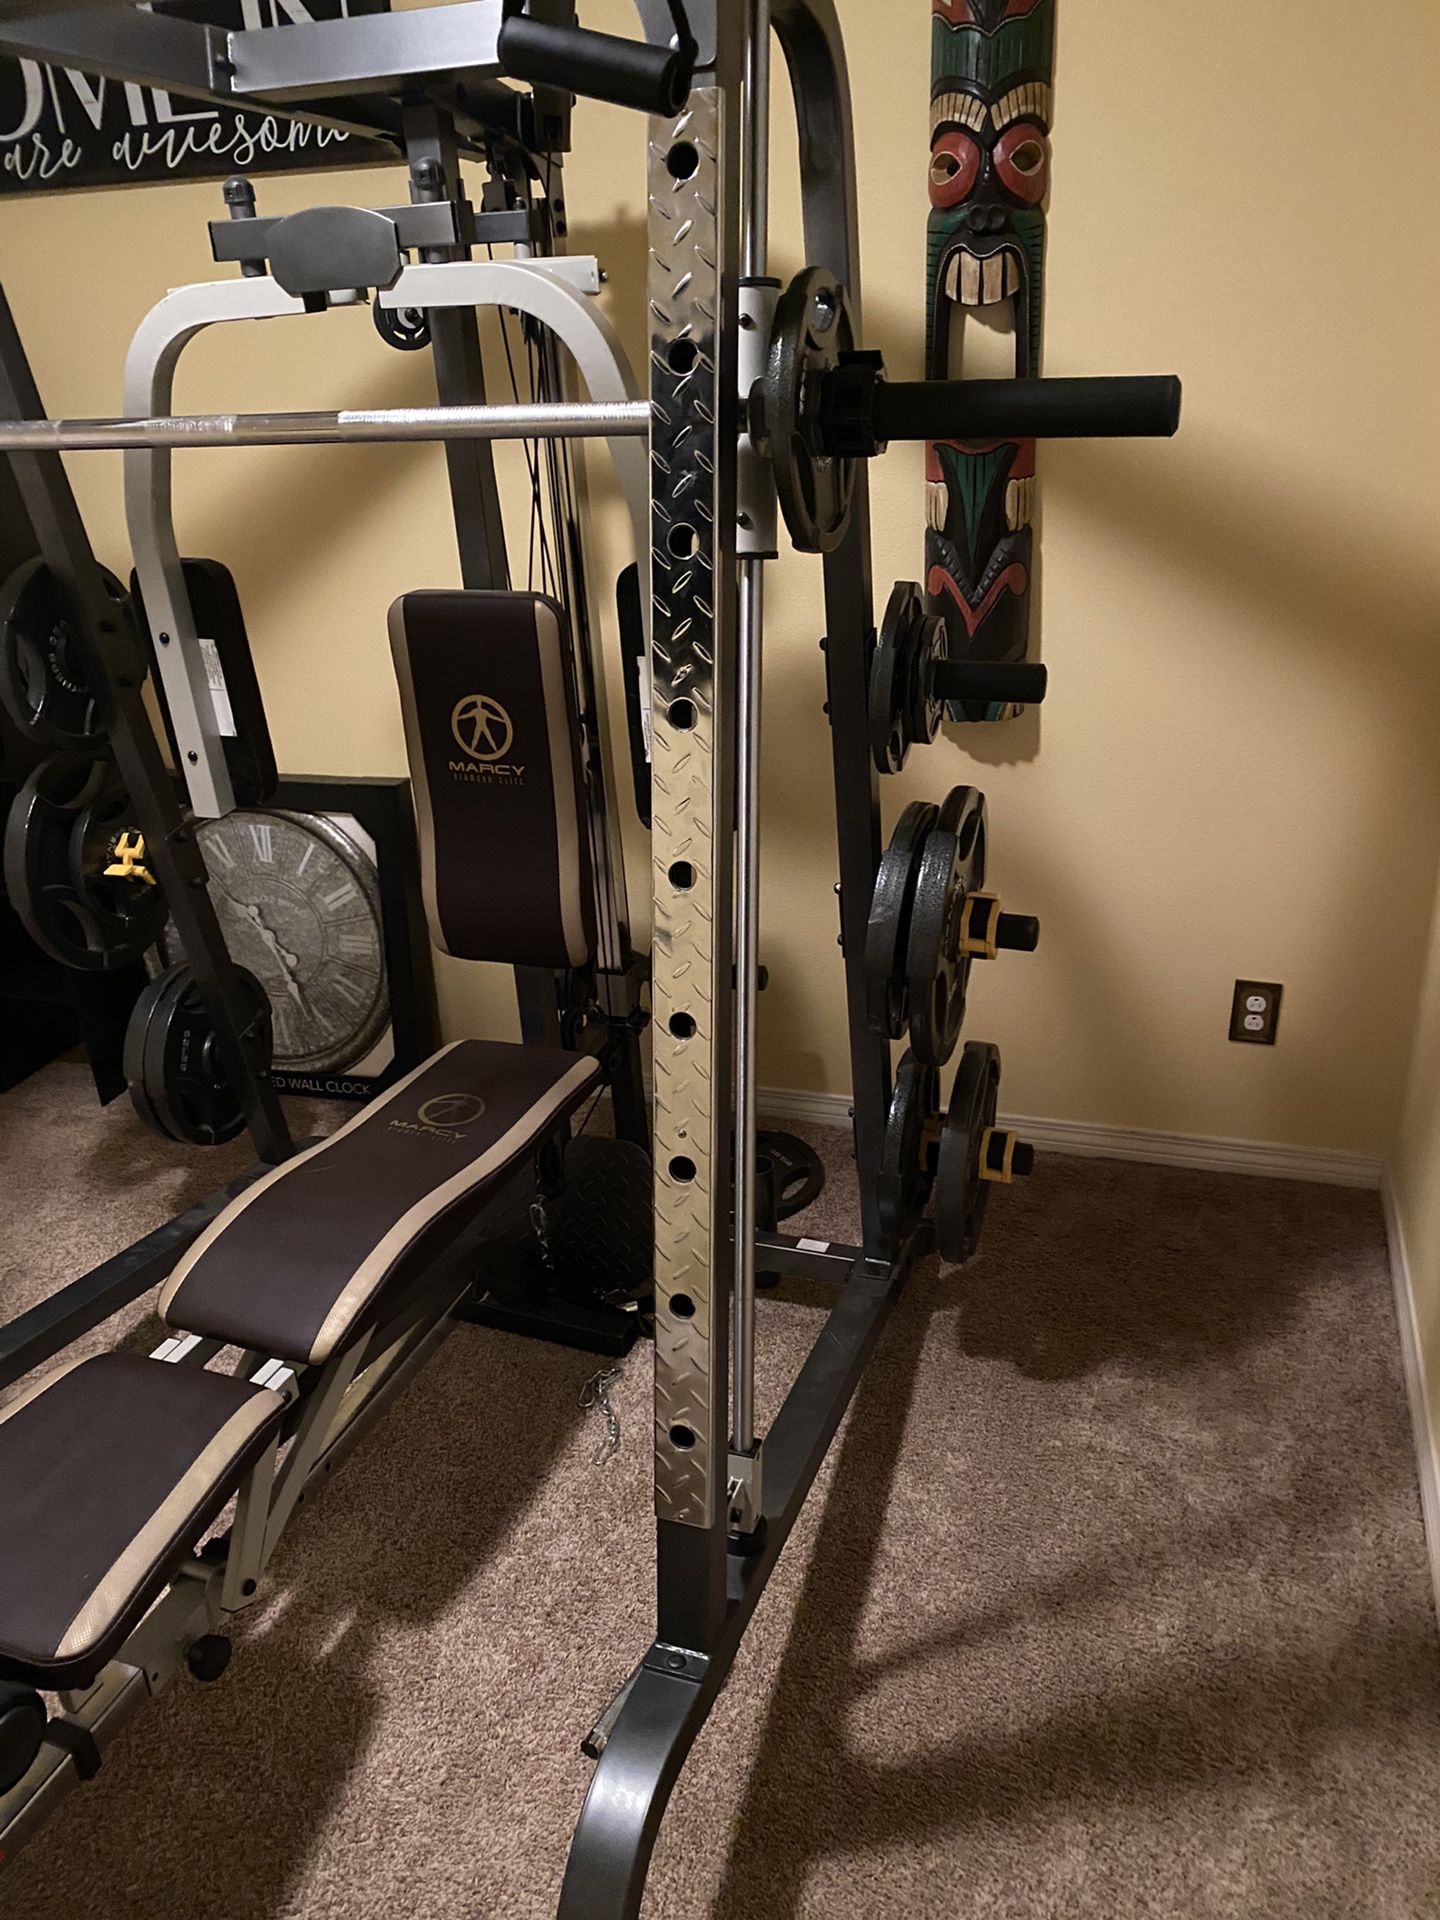 Marcy elite home gym Like new condition